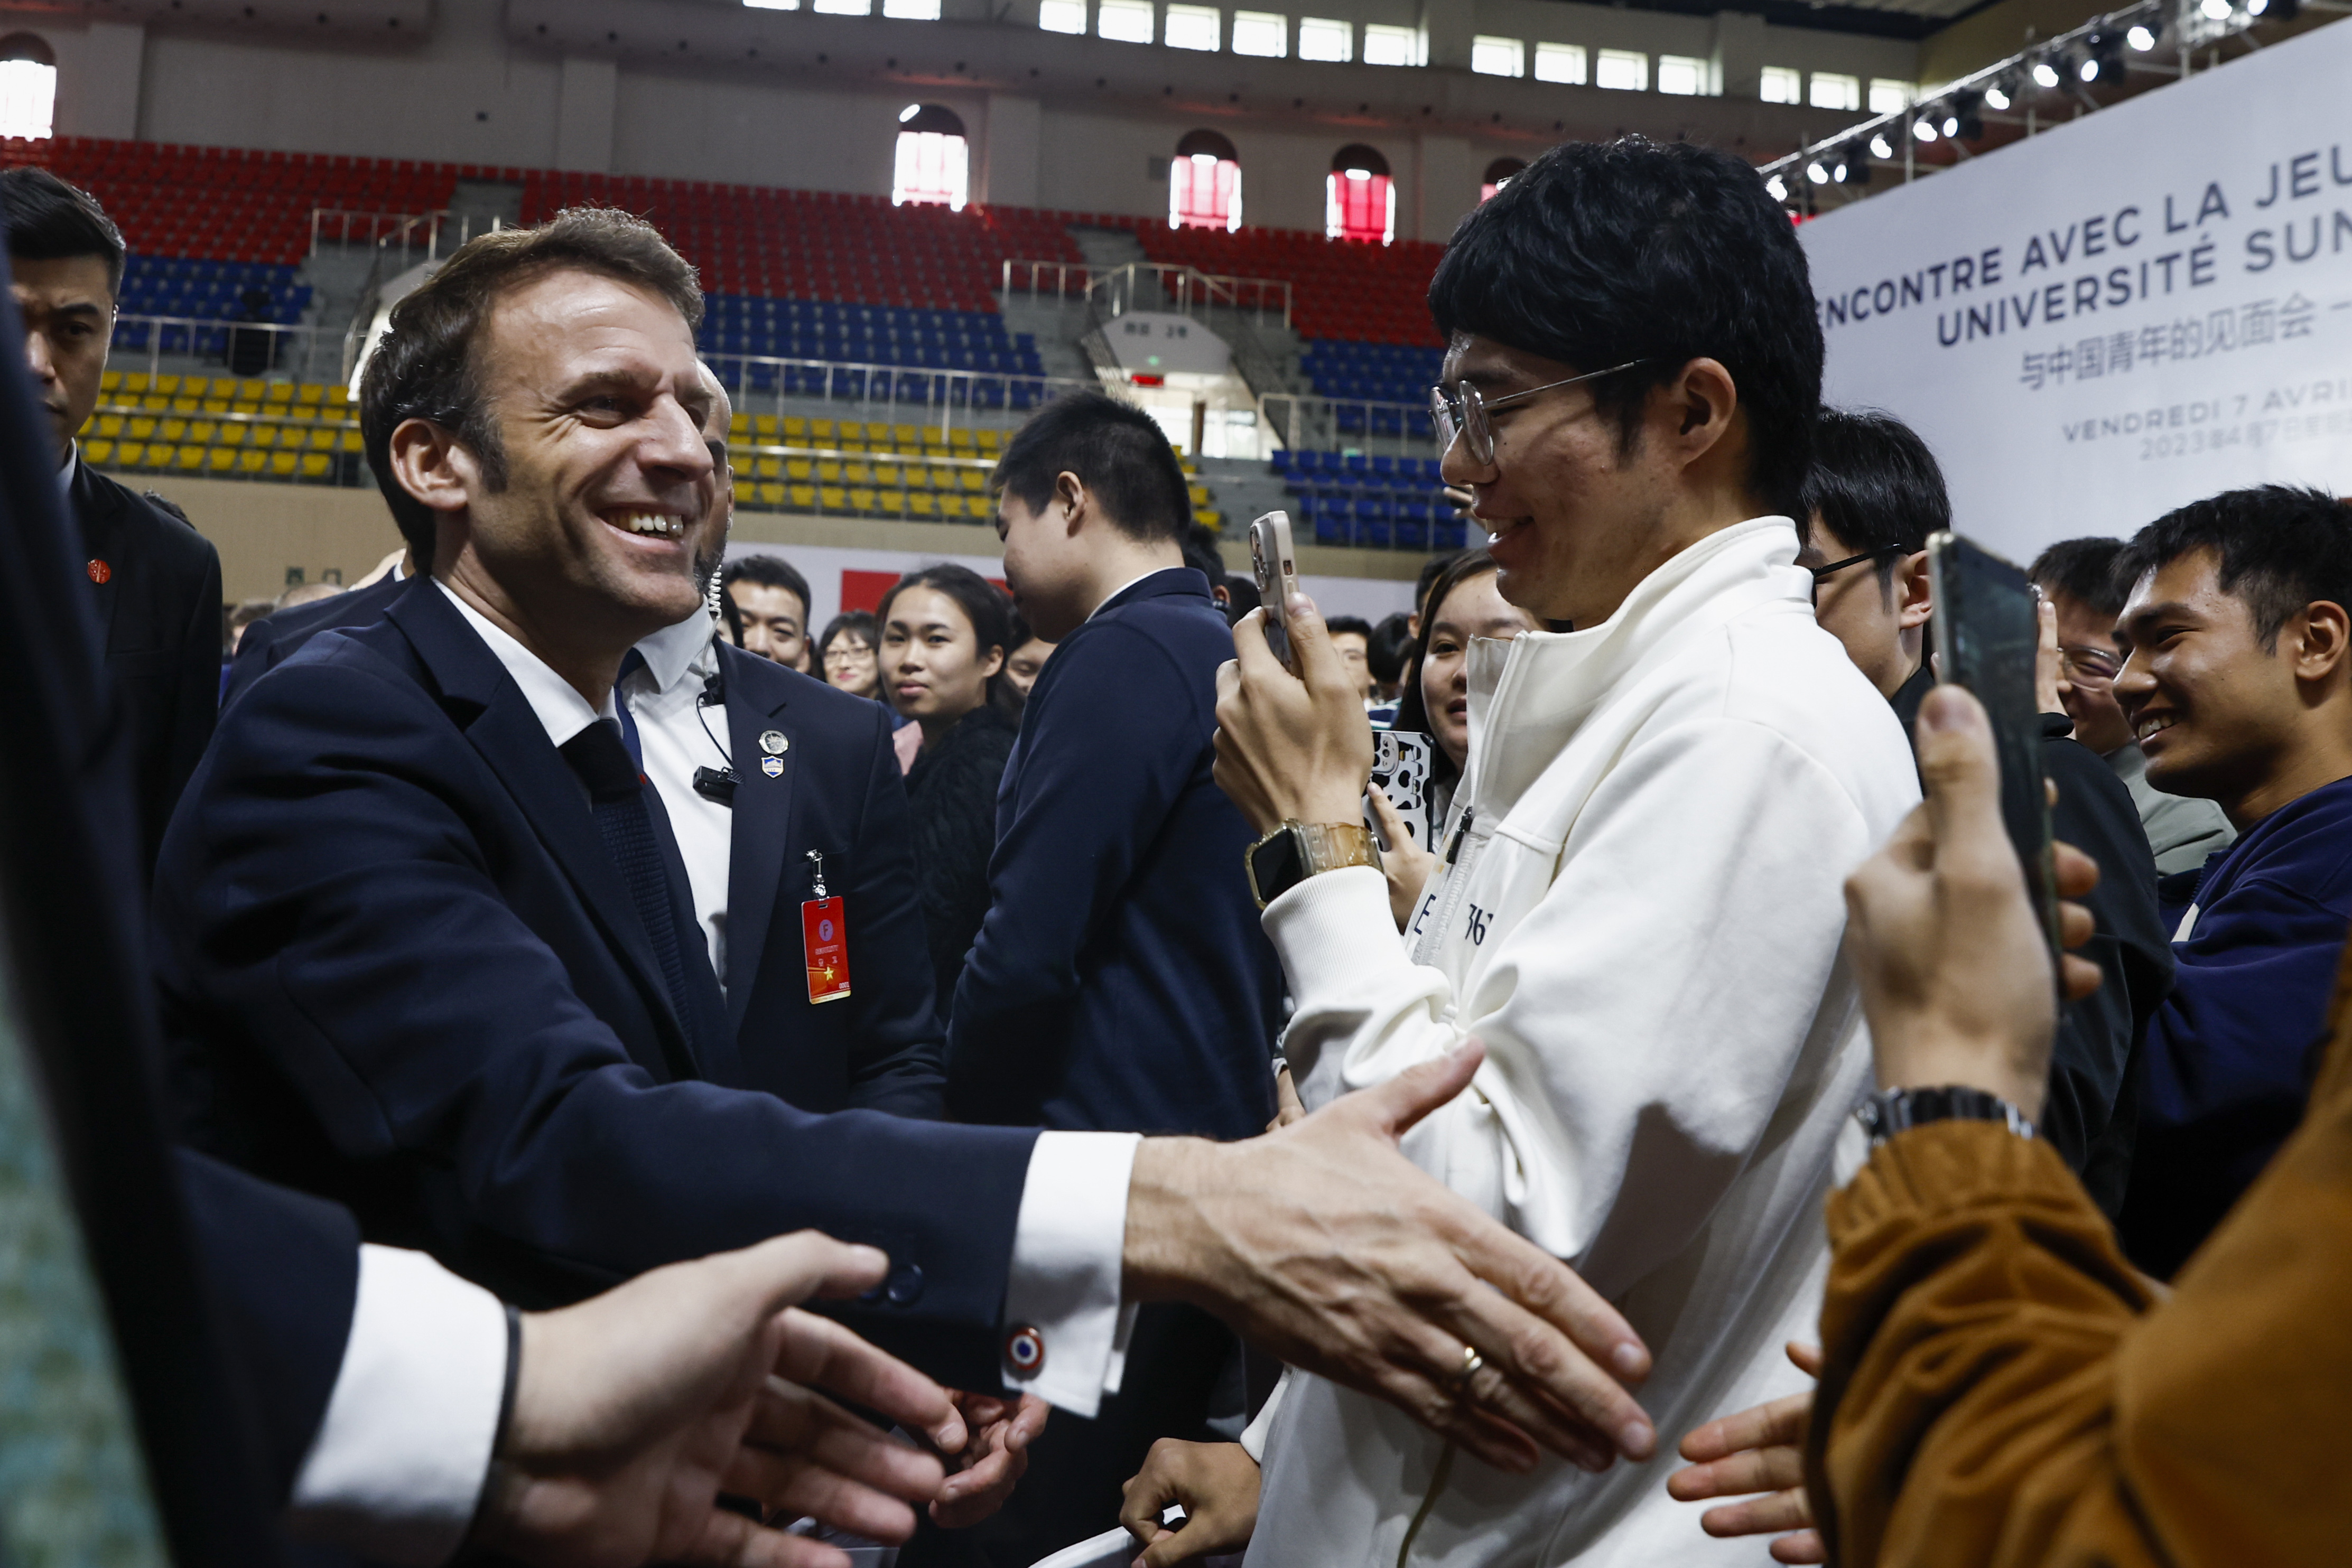 French President Macron has led trade delegates on a three day trip to China. Source: /Gonzalo Fuentes/AP   